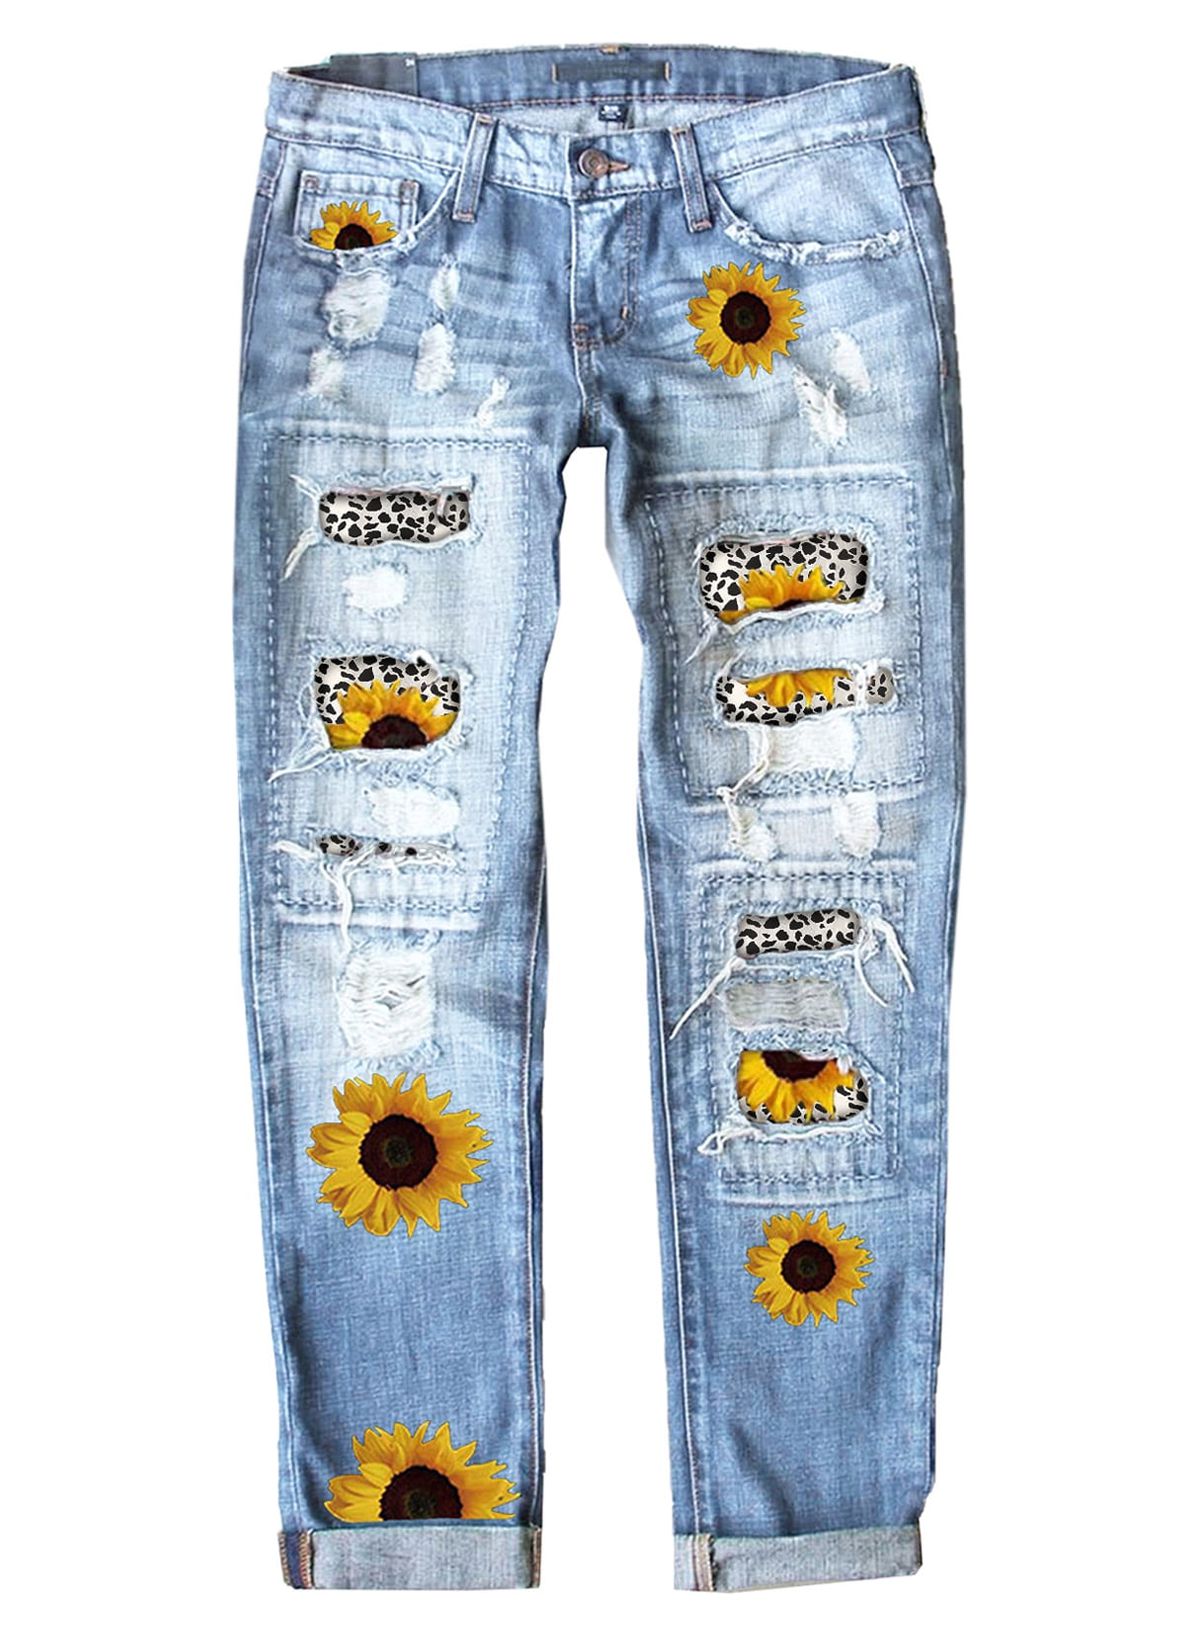 Dokotoo Patch Jean for Woman Light Blue Distressed Jeans Stretchy Sunflower  Printed Denim Pants for Women Mom Jeans High Waisted Pants, Us 12-14(L)